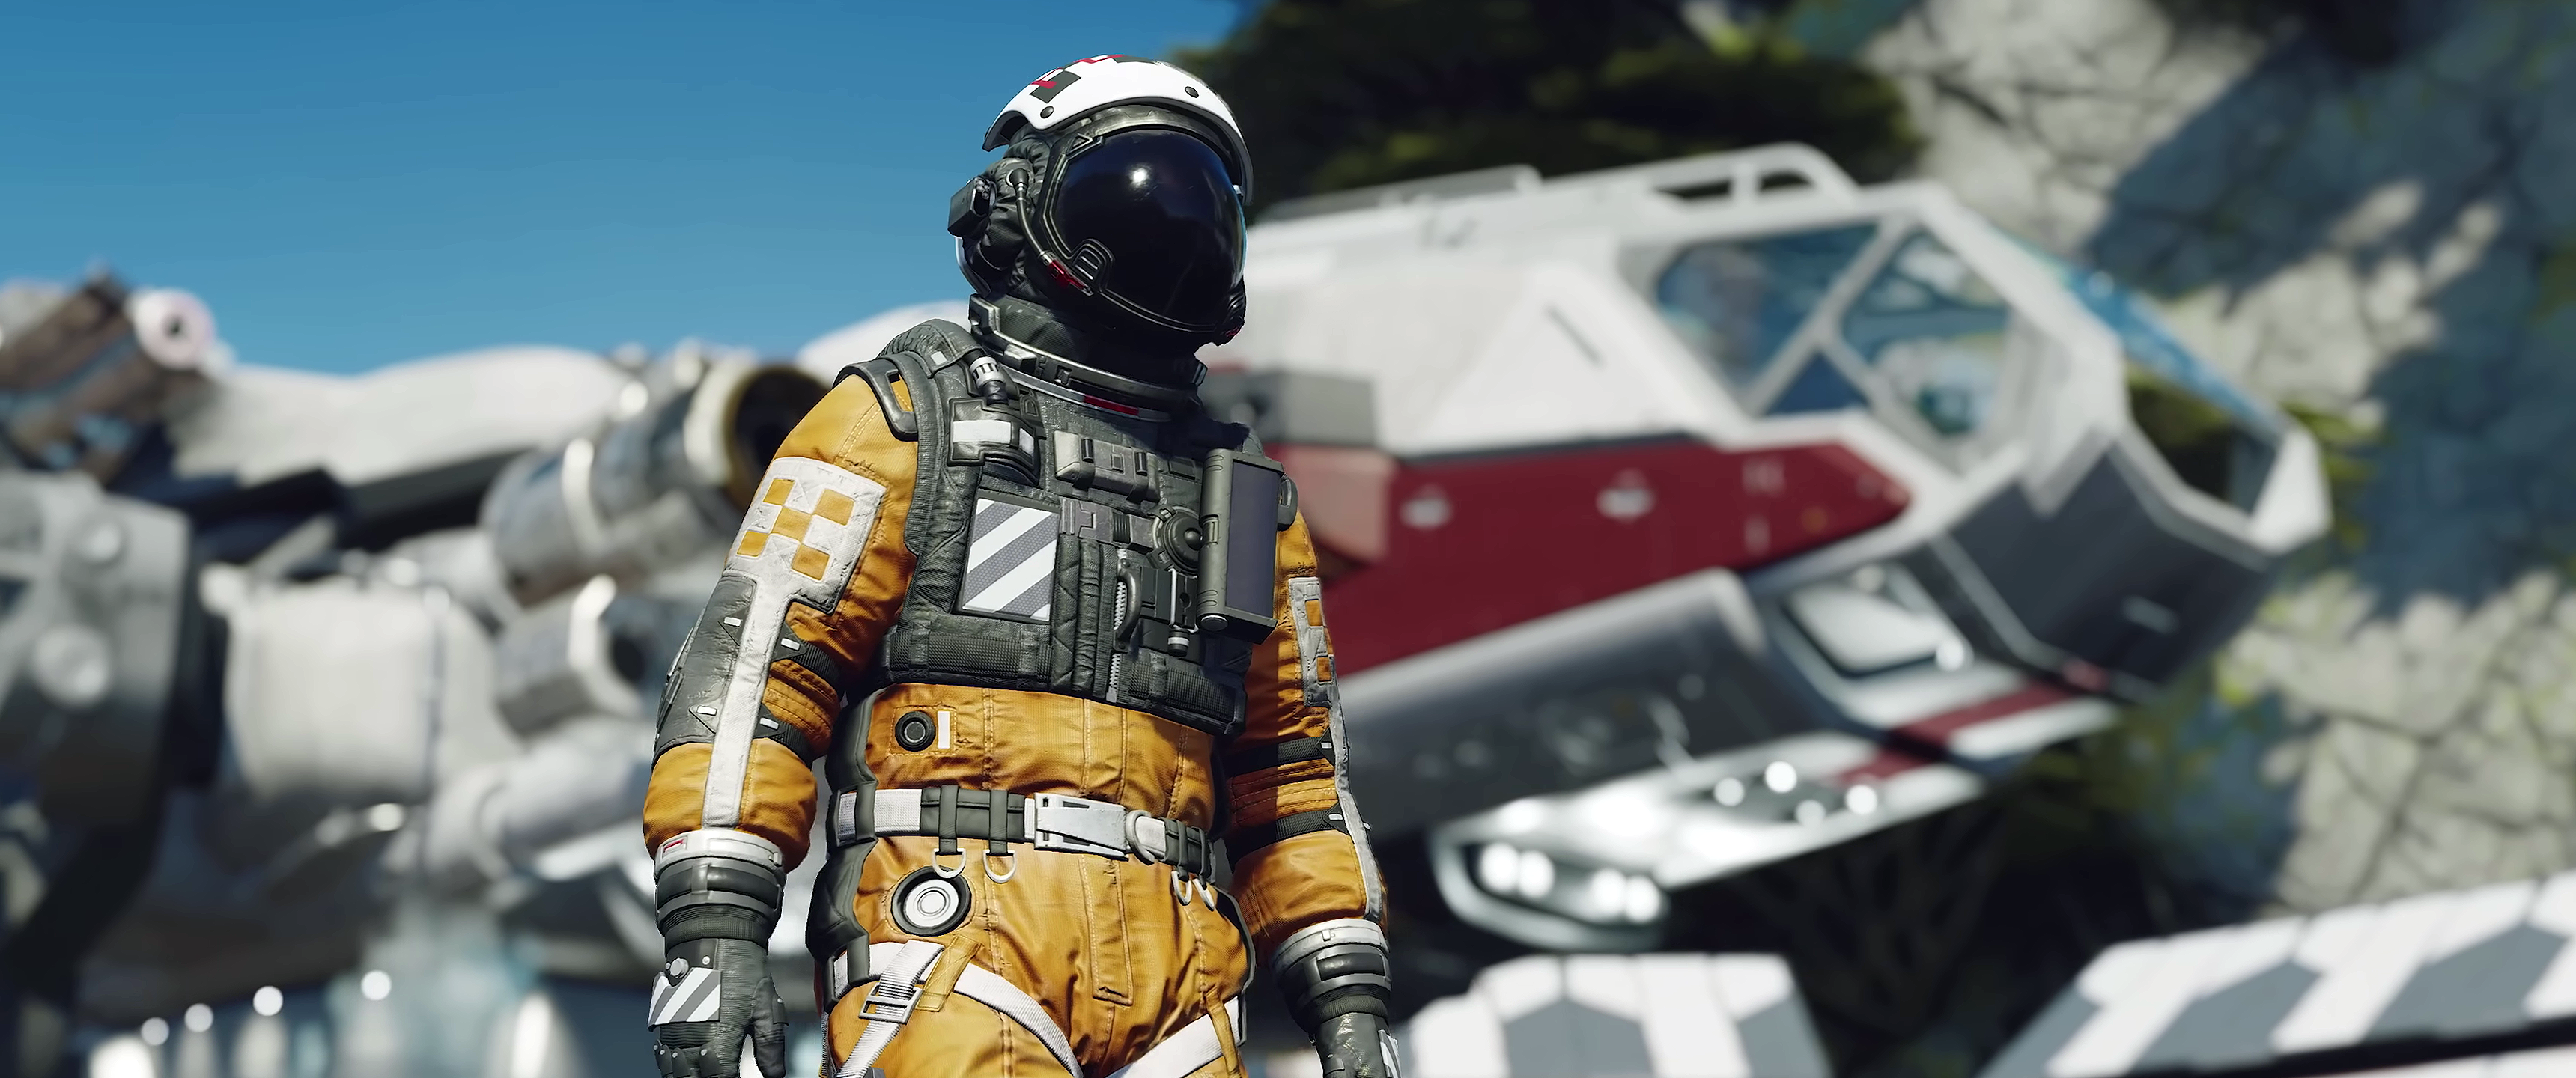 General 3440x1440 Starfield (video game) Bethesda Softworks space video games spacesuit spaceship technology blurred blurry background helmet CGI video game characters video game men